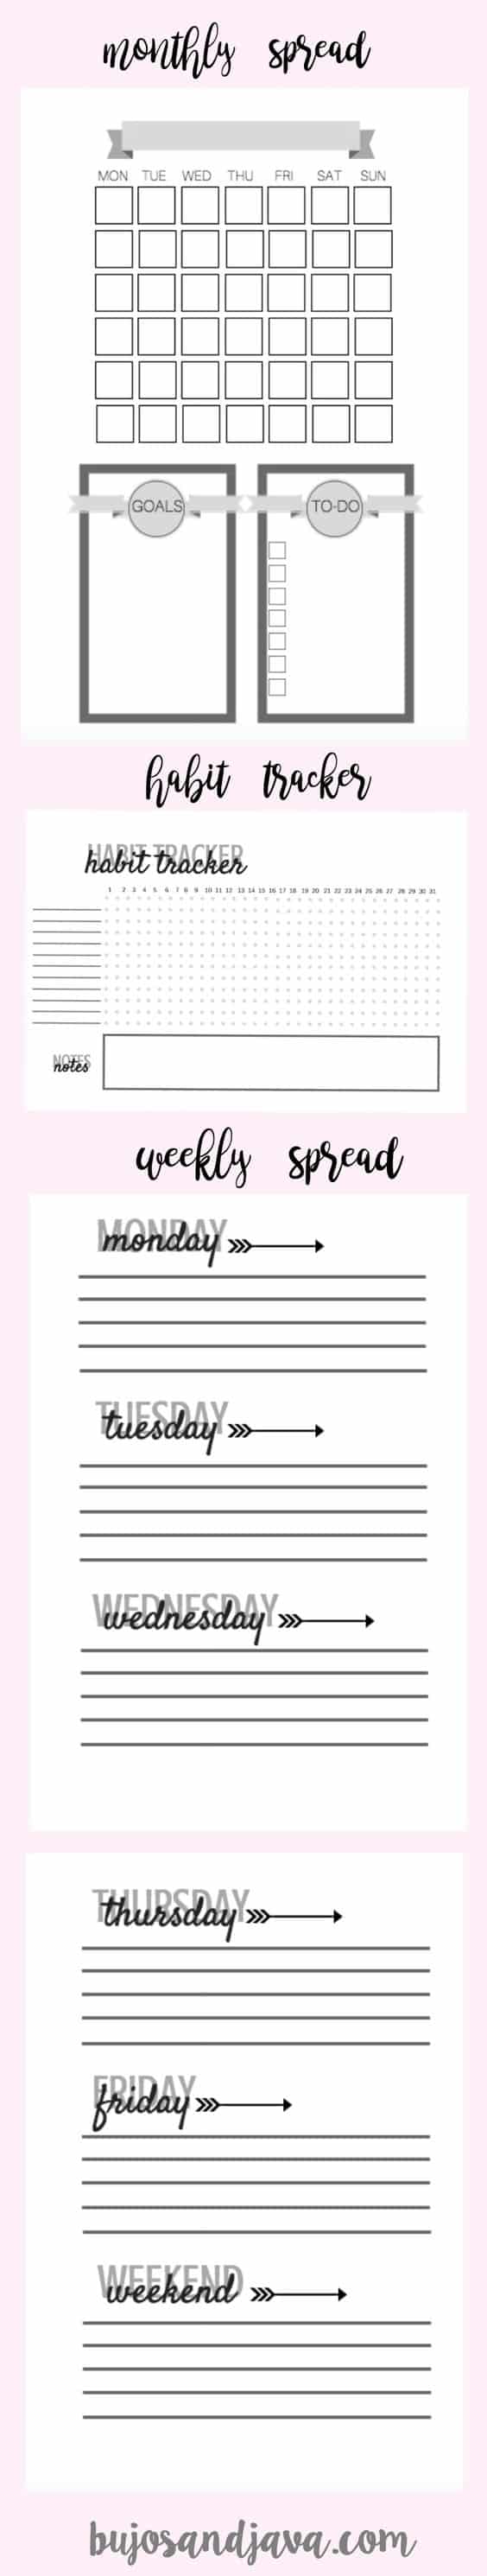 More Than 50 Awesome Bullet Journal Printables To Help You Be Creative With You Re Short On Time